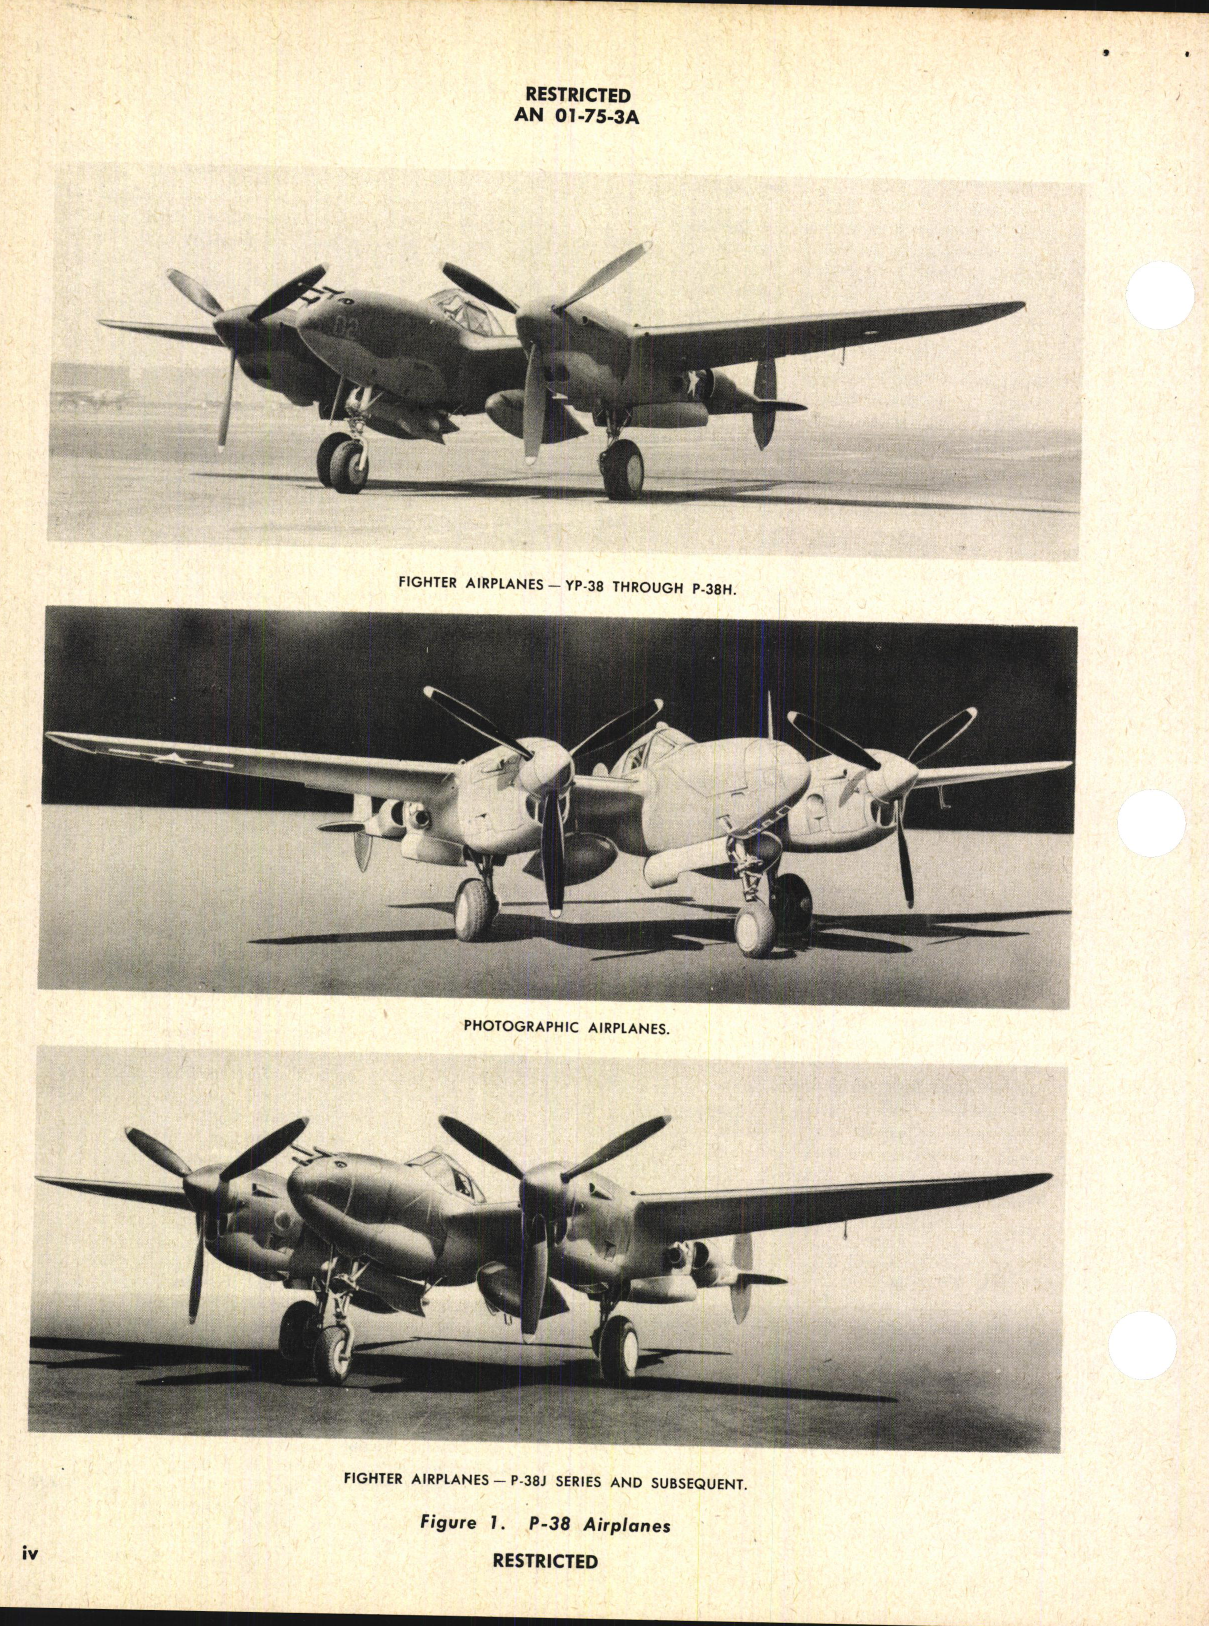 Sample page 6 from AirCorps Library document: Structural Repair Instructions for P-38 Series through P-38J-25, F-4 and F-5 Series